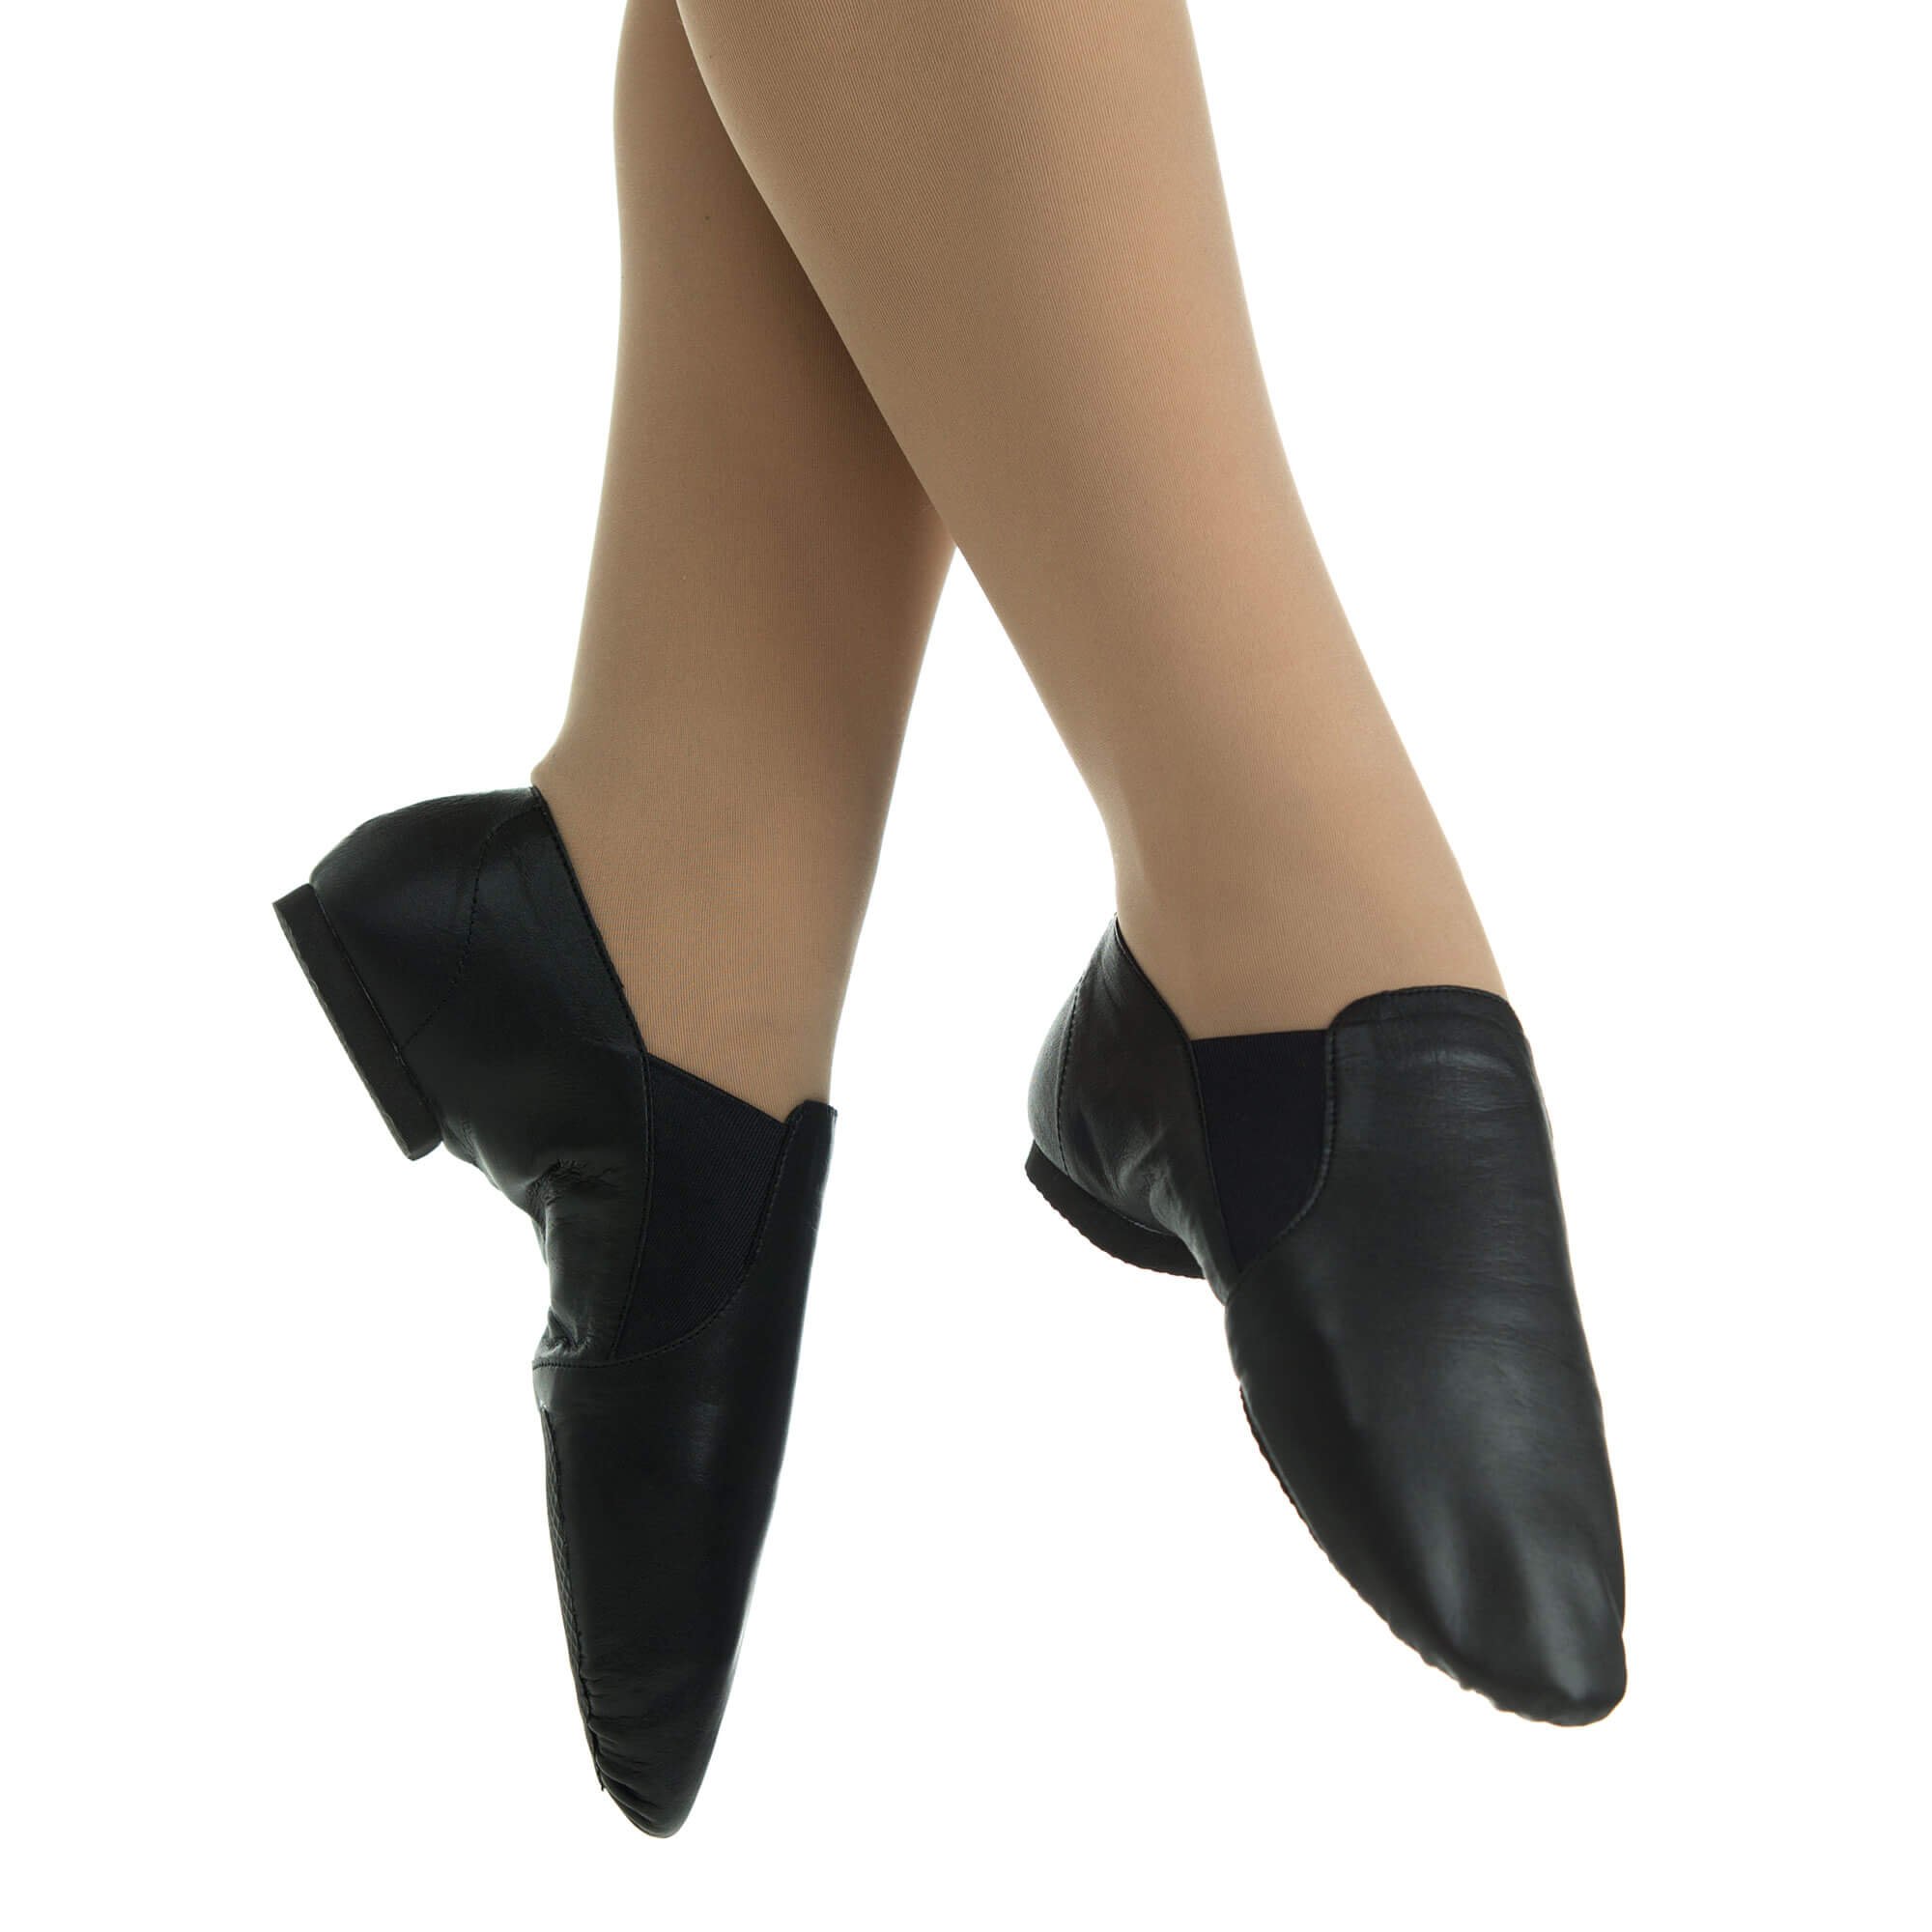 Danzcue Adult Dance Leather Jazz Bootie Shoes